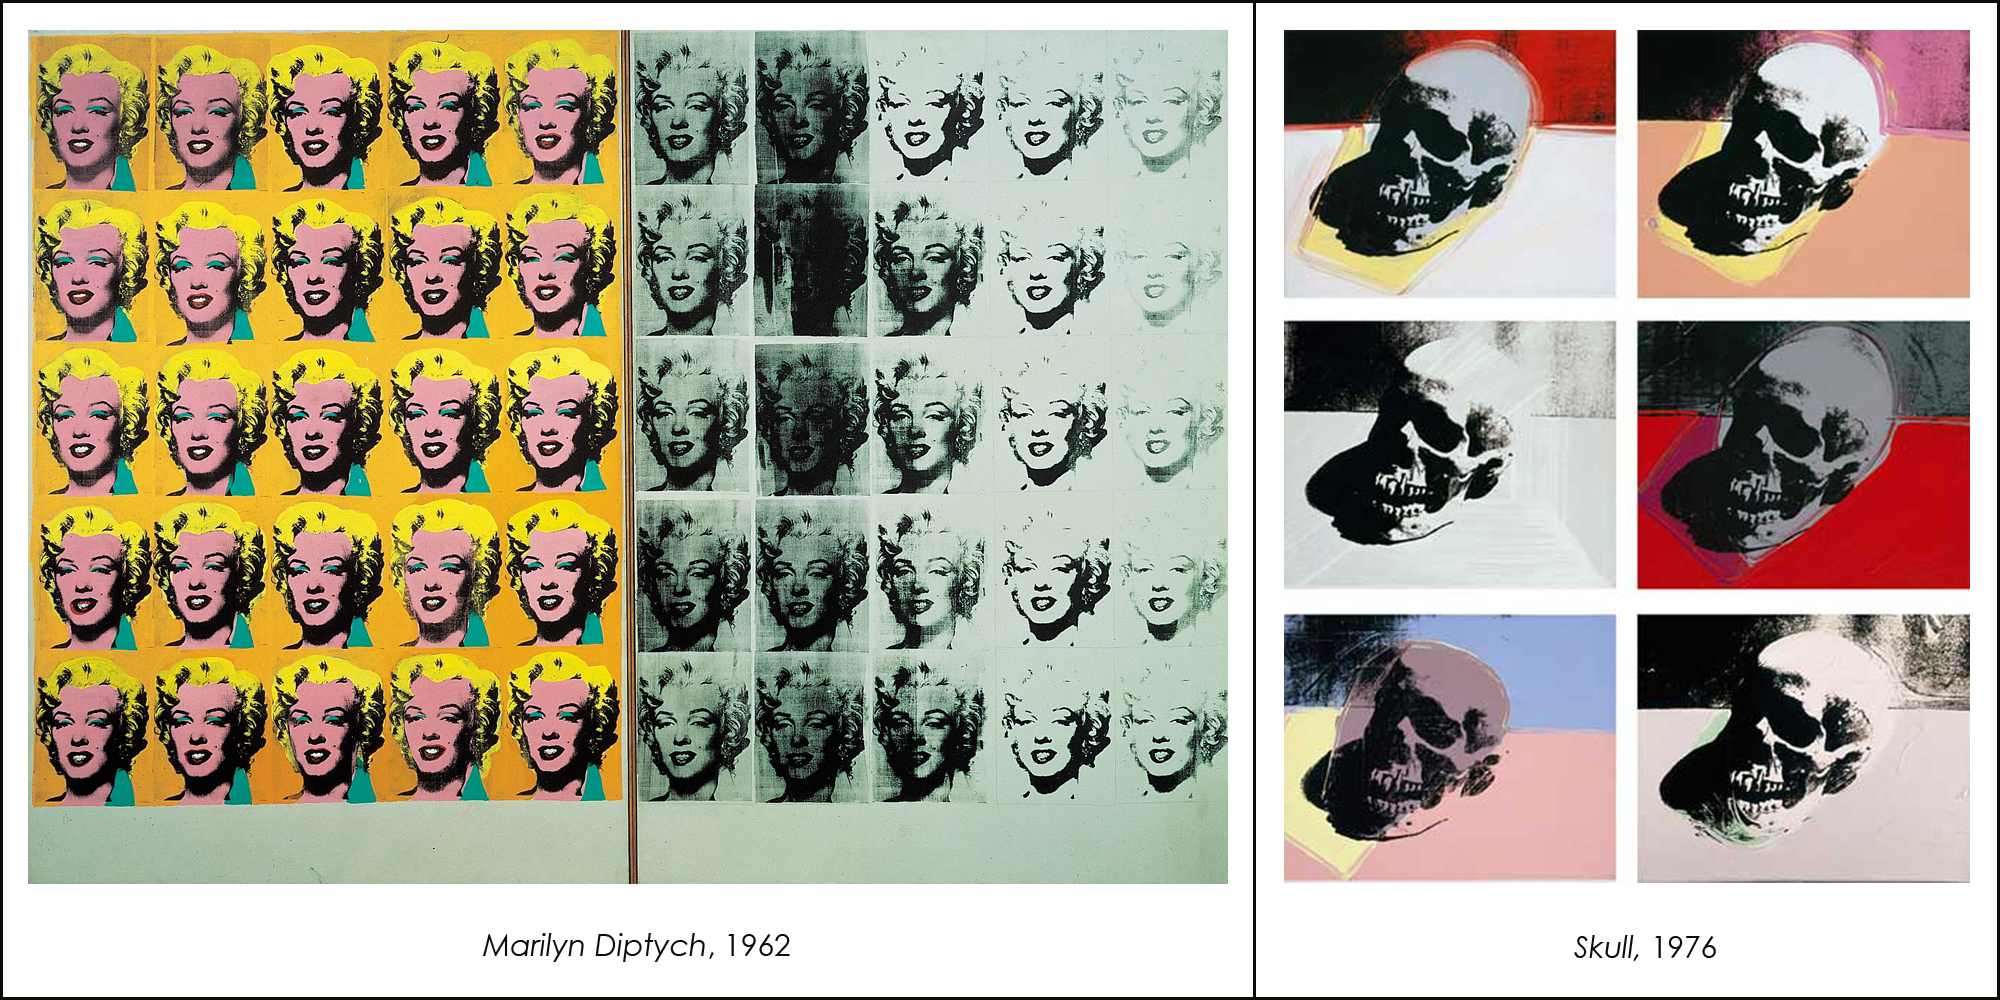 Marilyn Diptych and Skull by Andy Warhol